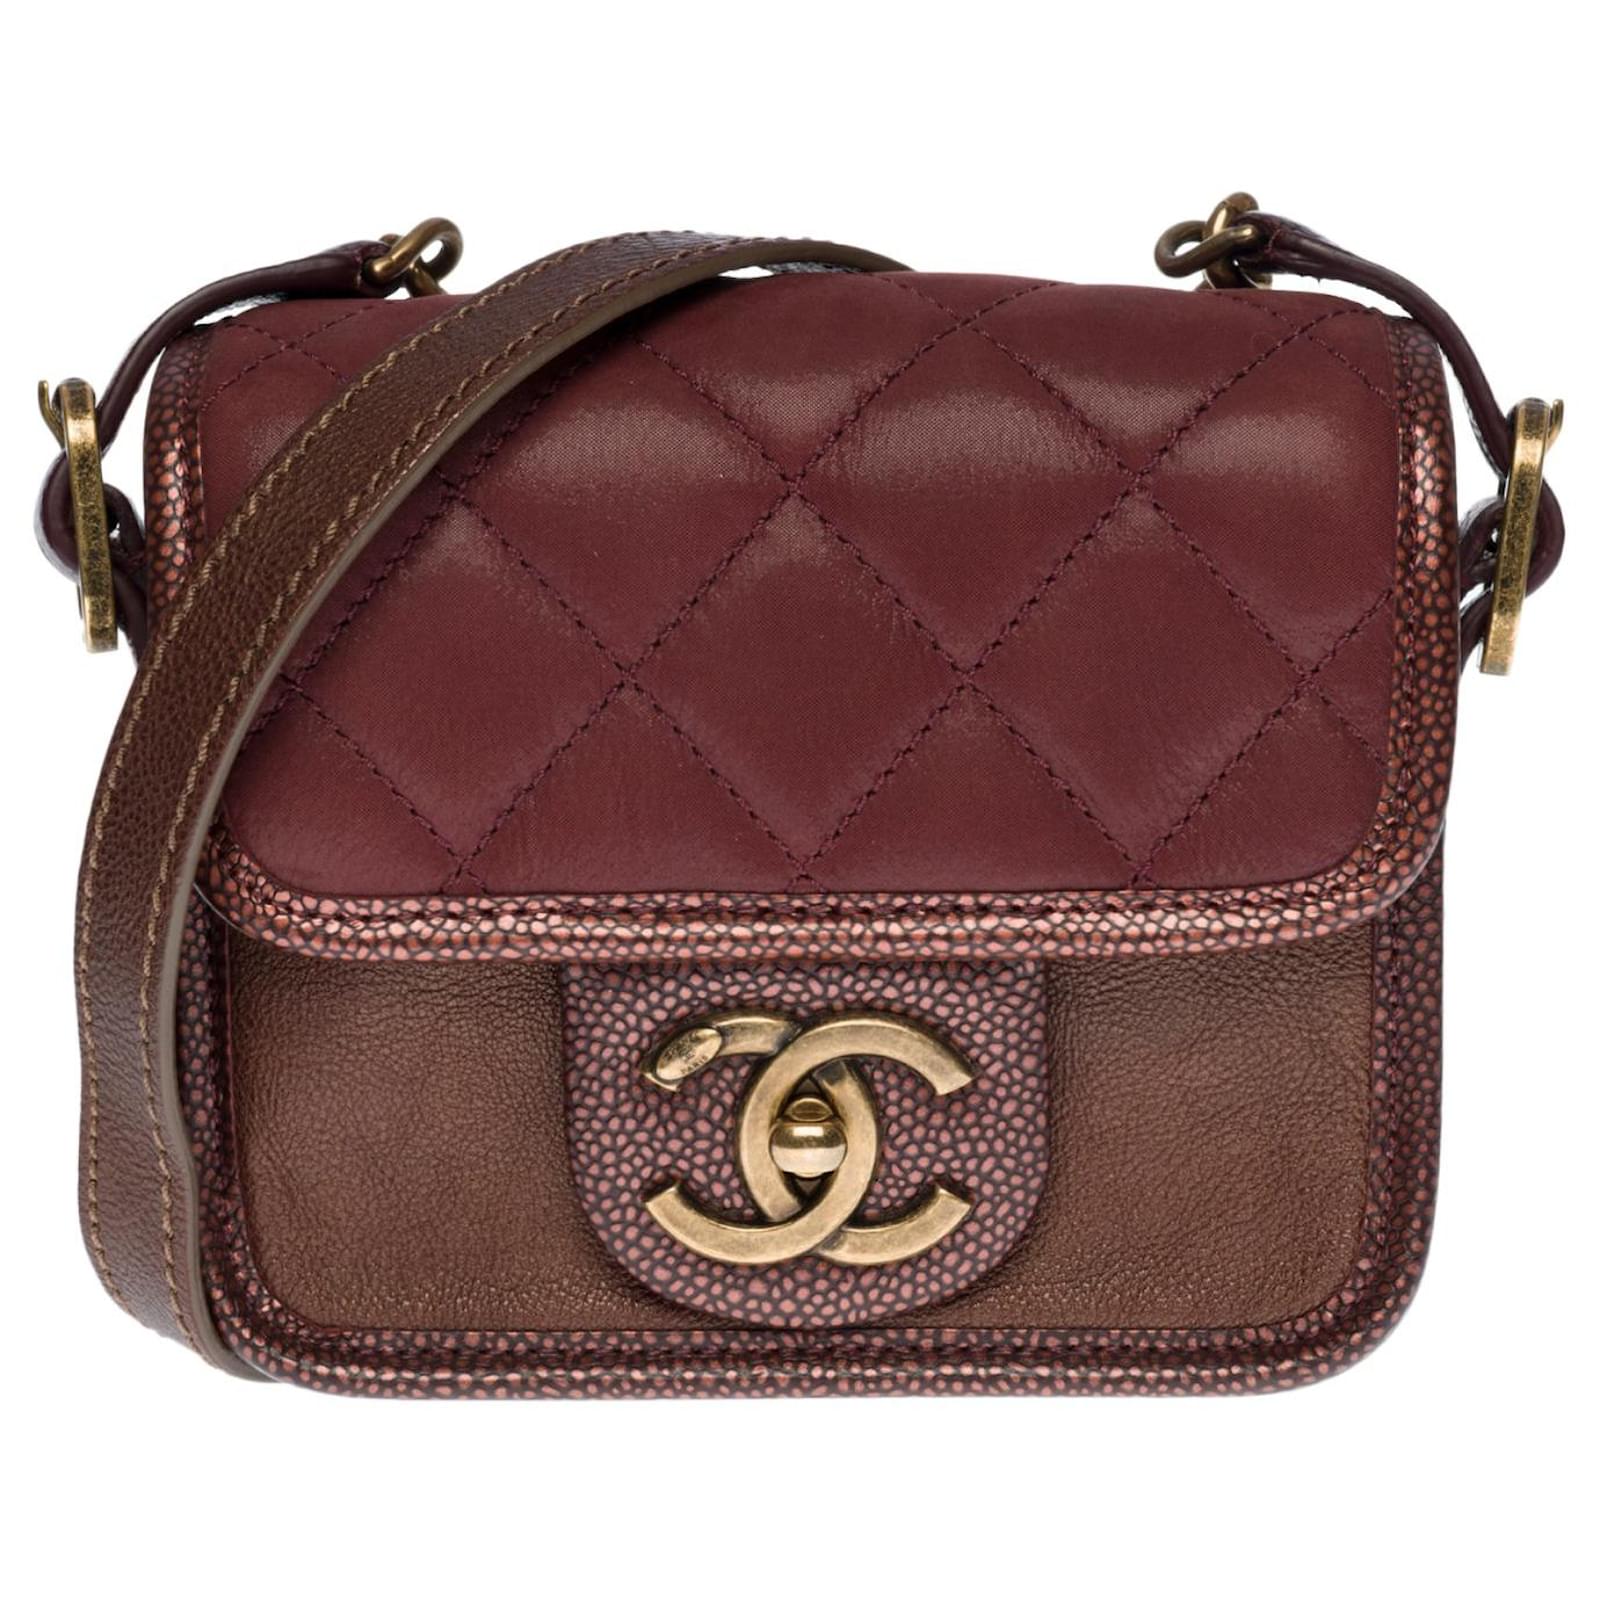 Superb and original mini Chanel burgundy bag in partially quilted leather,  hardware in aged gold metal